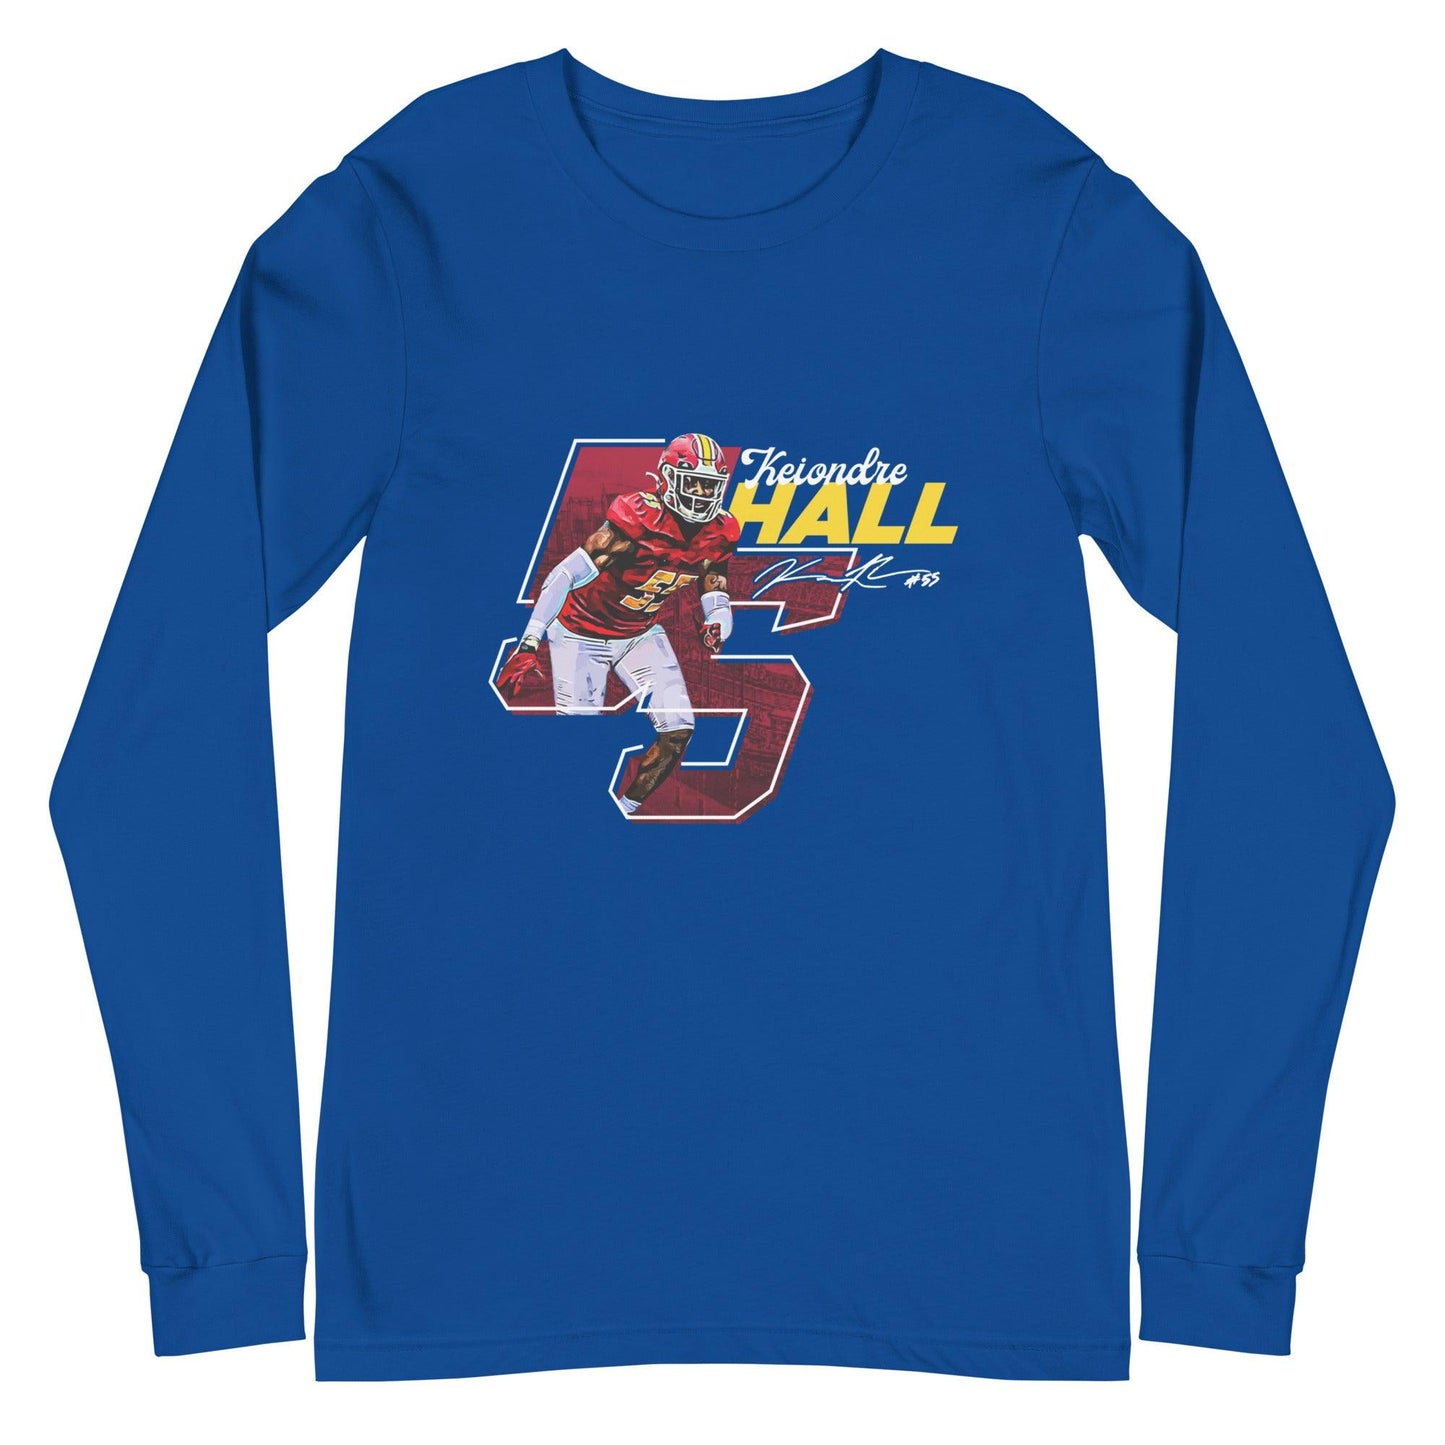 Keiondre Hall "Signature" Long Sleeve Tee - Fan Arch